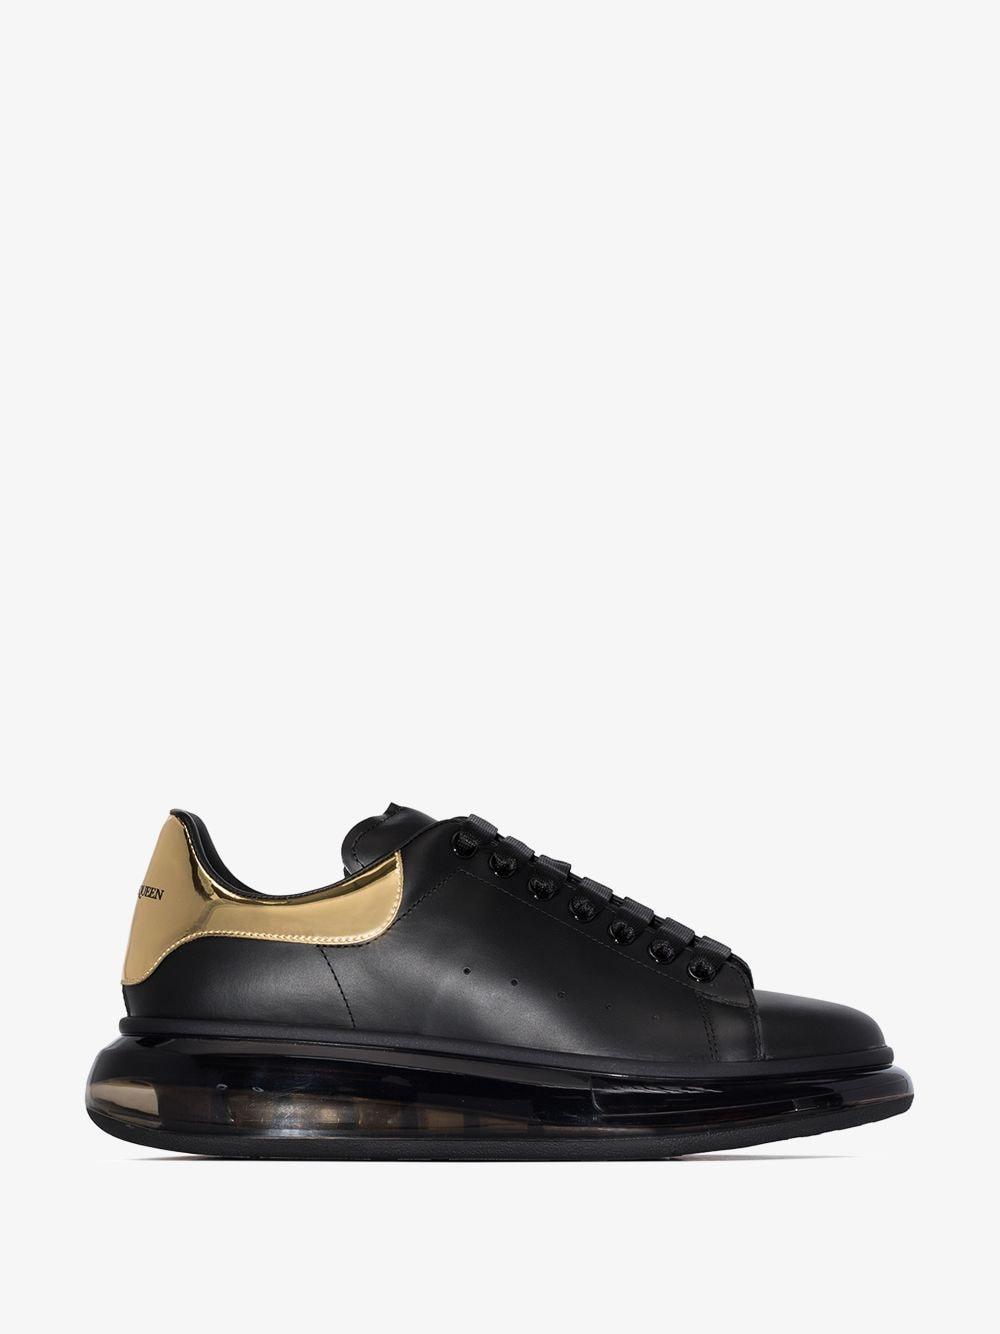 Alexander McQueen Leather Fashion Sneakers for Men